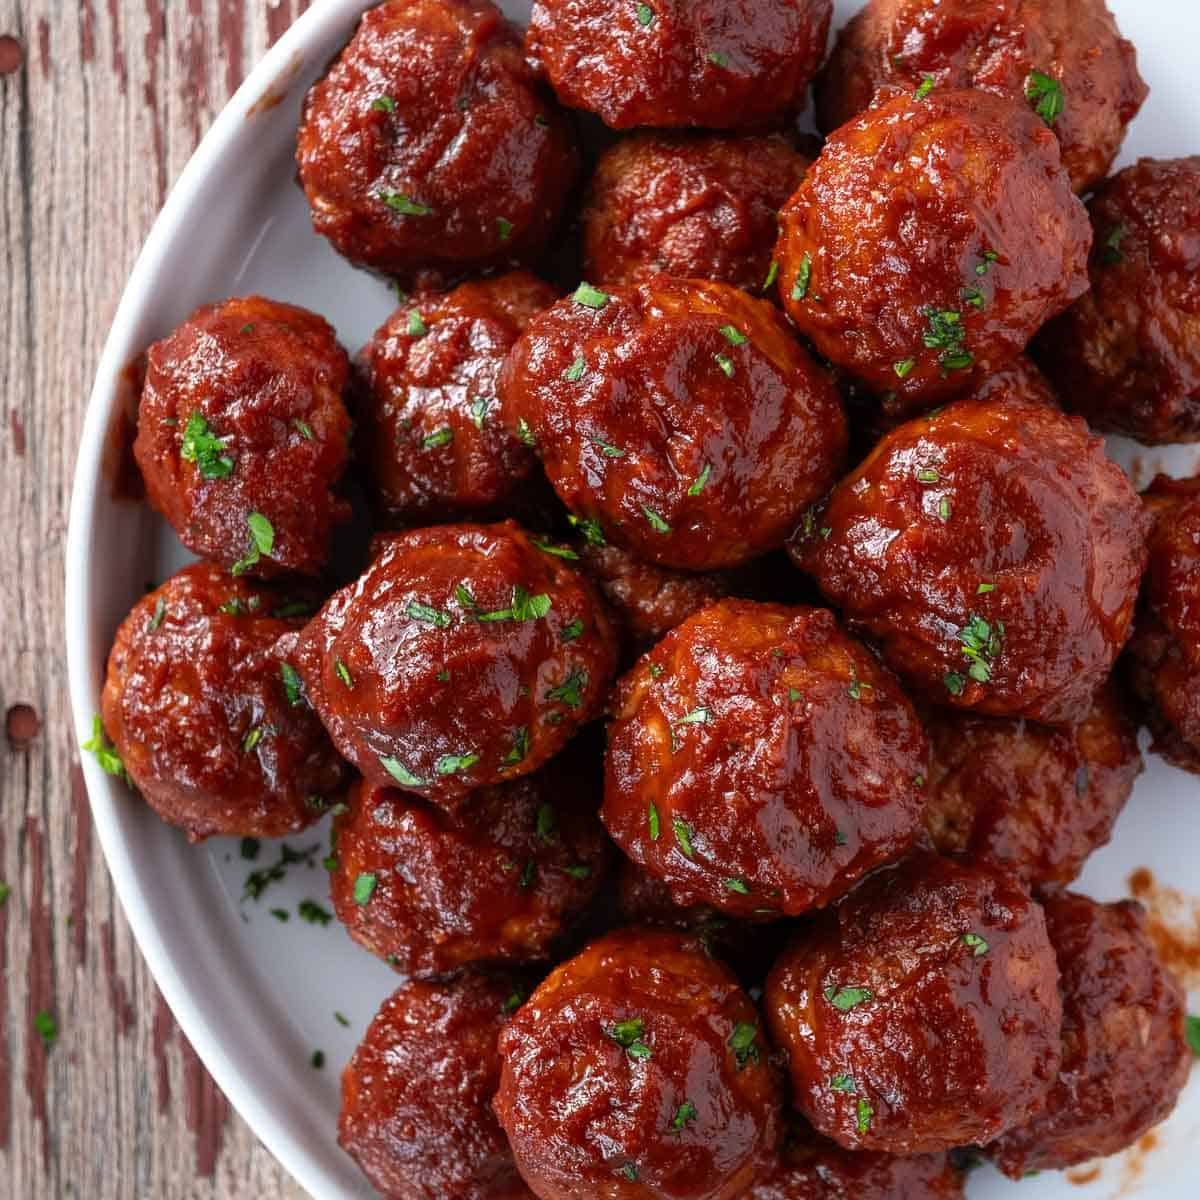 BBQ turkey meatballs on a plate and sauced with a red wine bbq sauce.